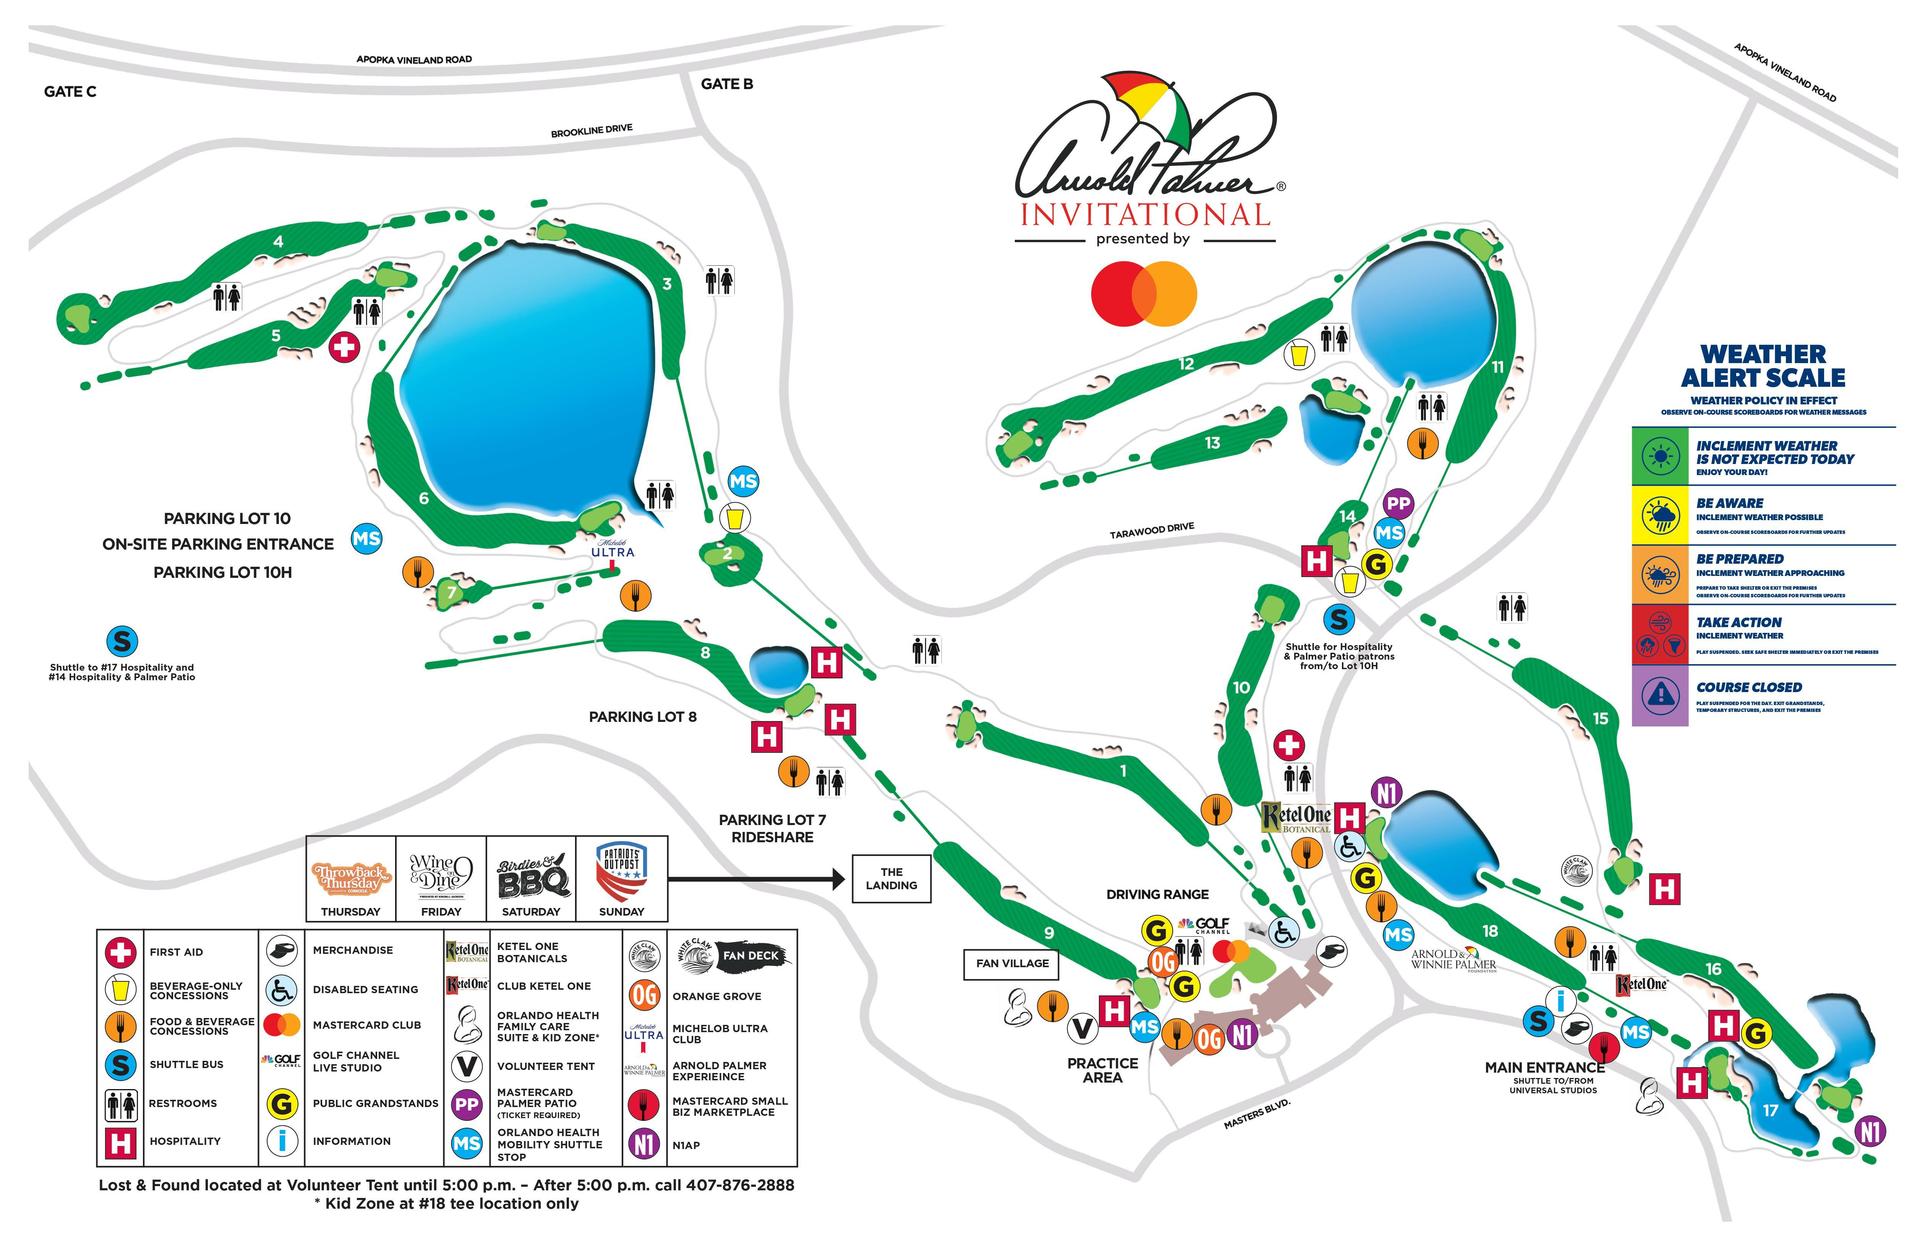 Map of the Bay Hill Country Club Course